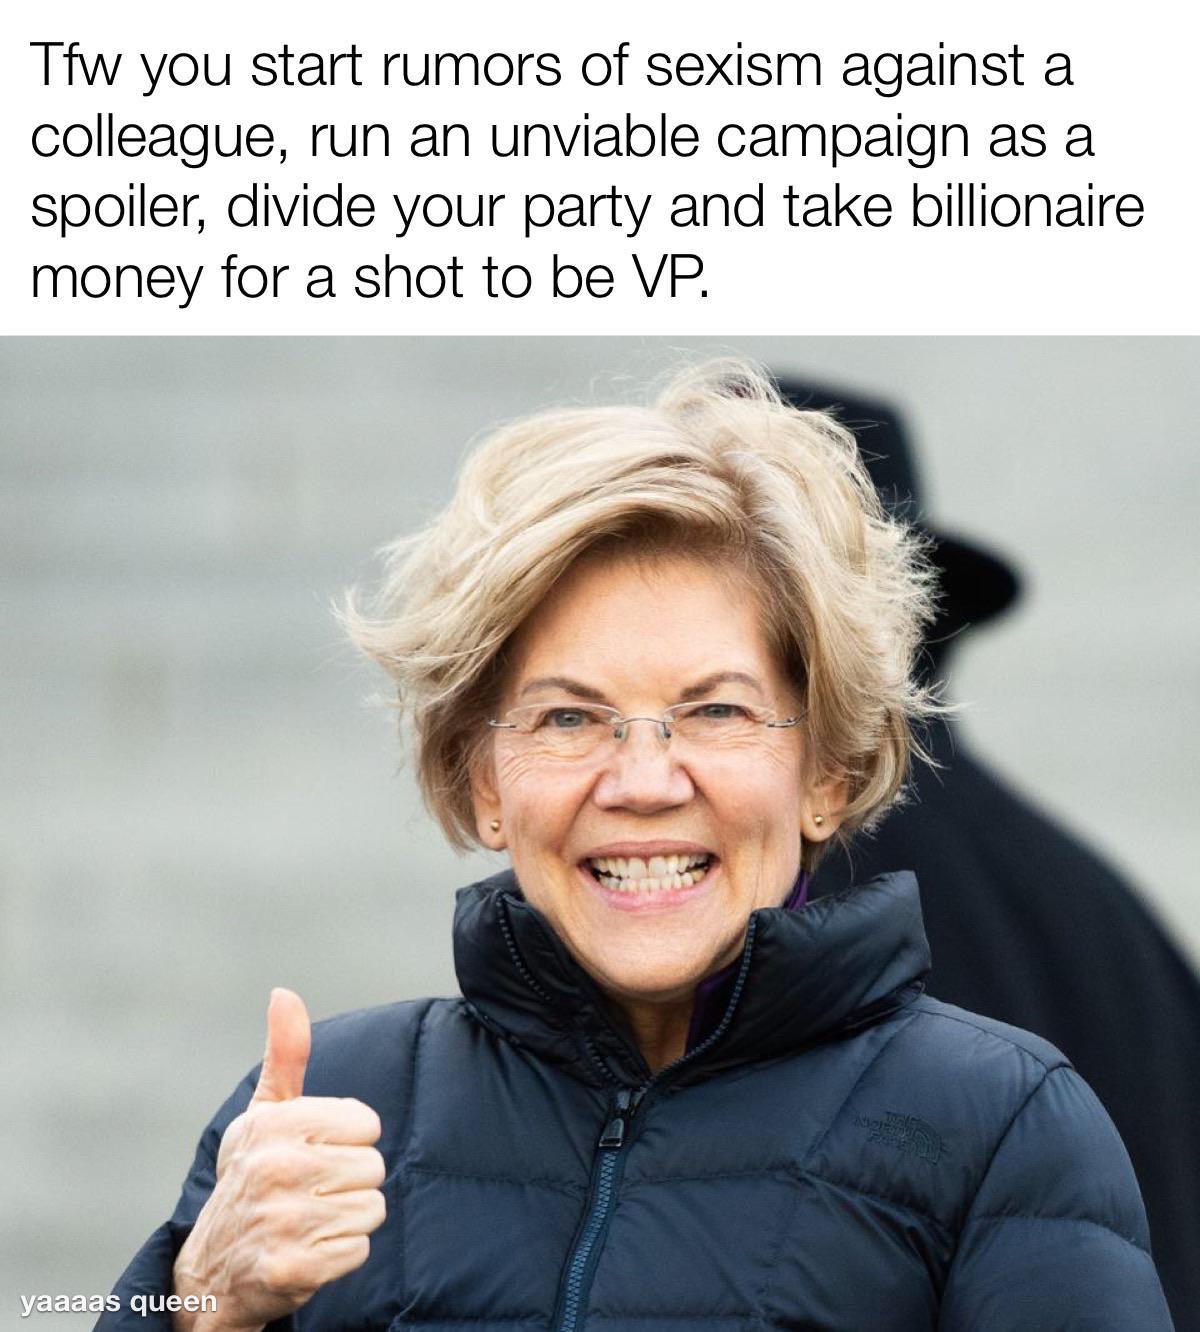 Political, Biden, Bernie, Warren, VP, Super PAC Political Memes Political, Biden, Bernie, Warren, VP, Super PAC text: Tfw you start rumors of sexism against a colleague, run an unviable campaign as a spoiler, divide your party and take billionaire money for a shot to be VP. yaaaa qu 